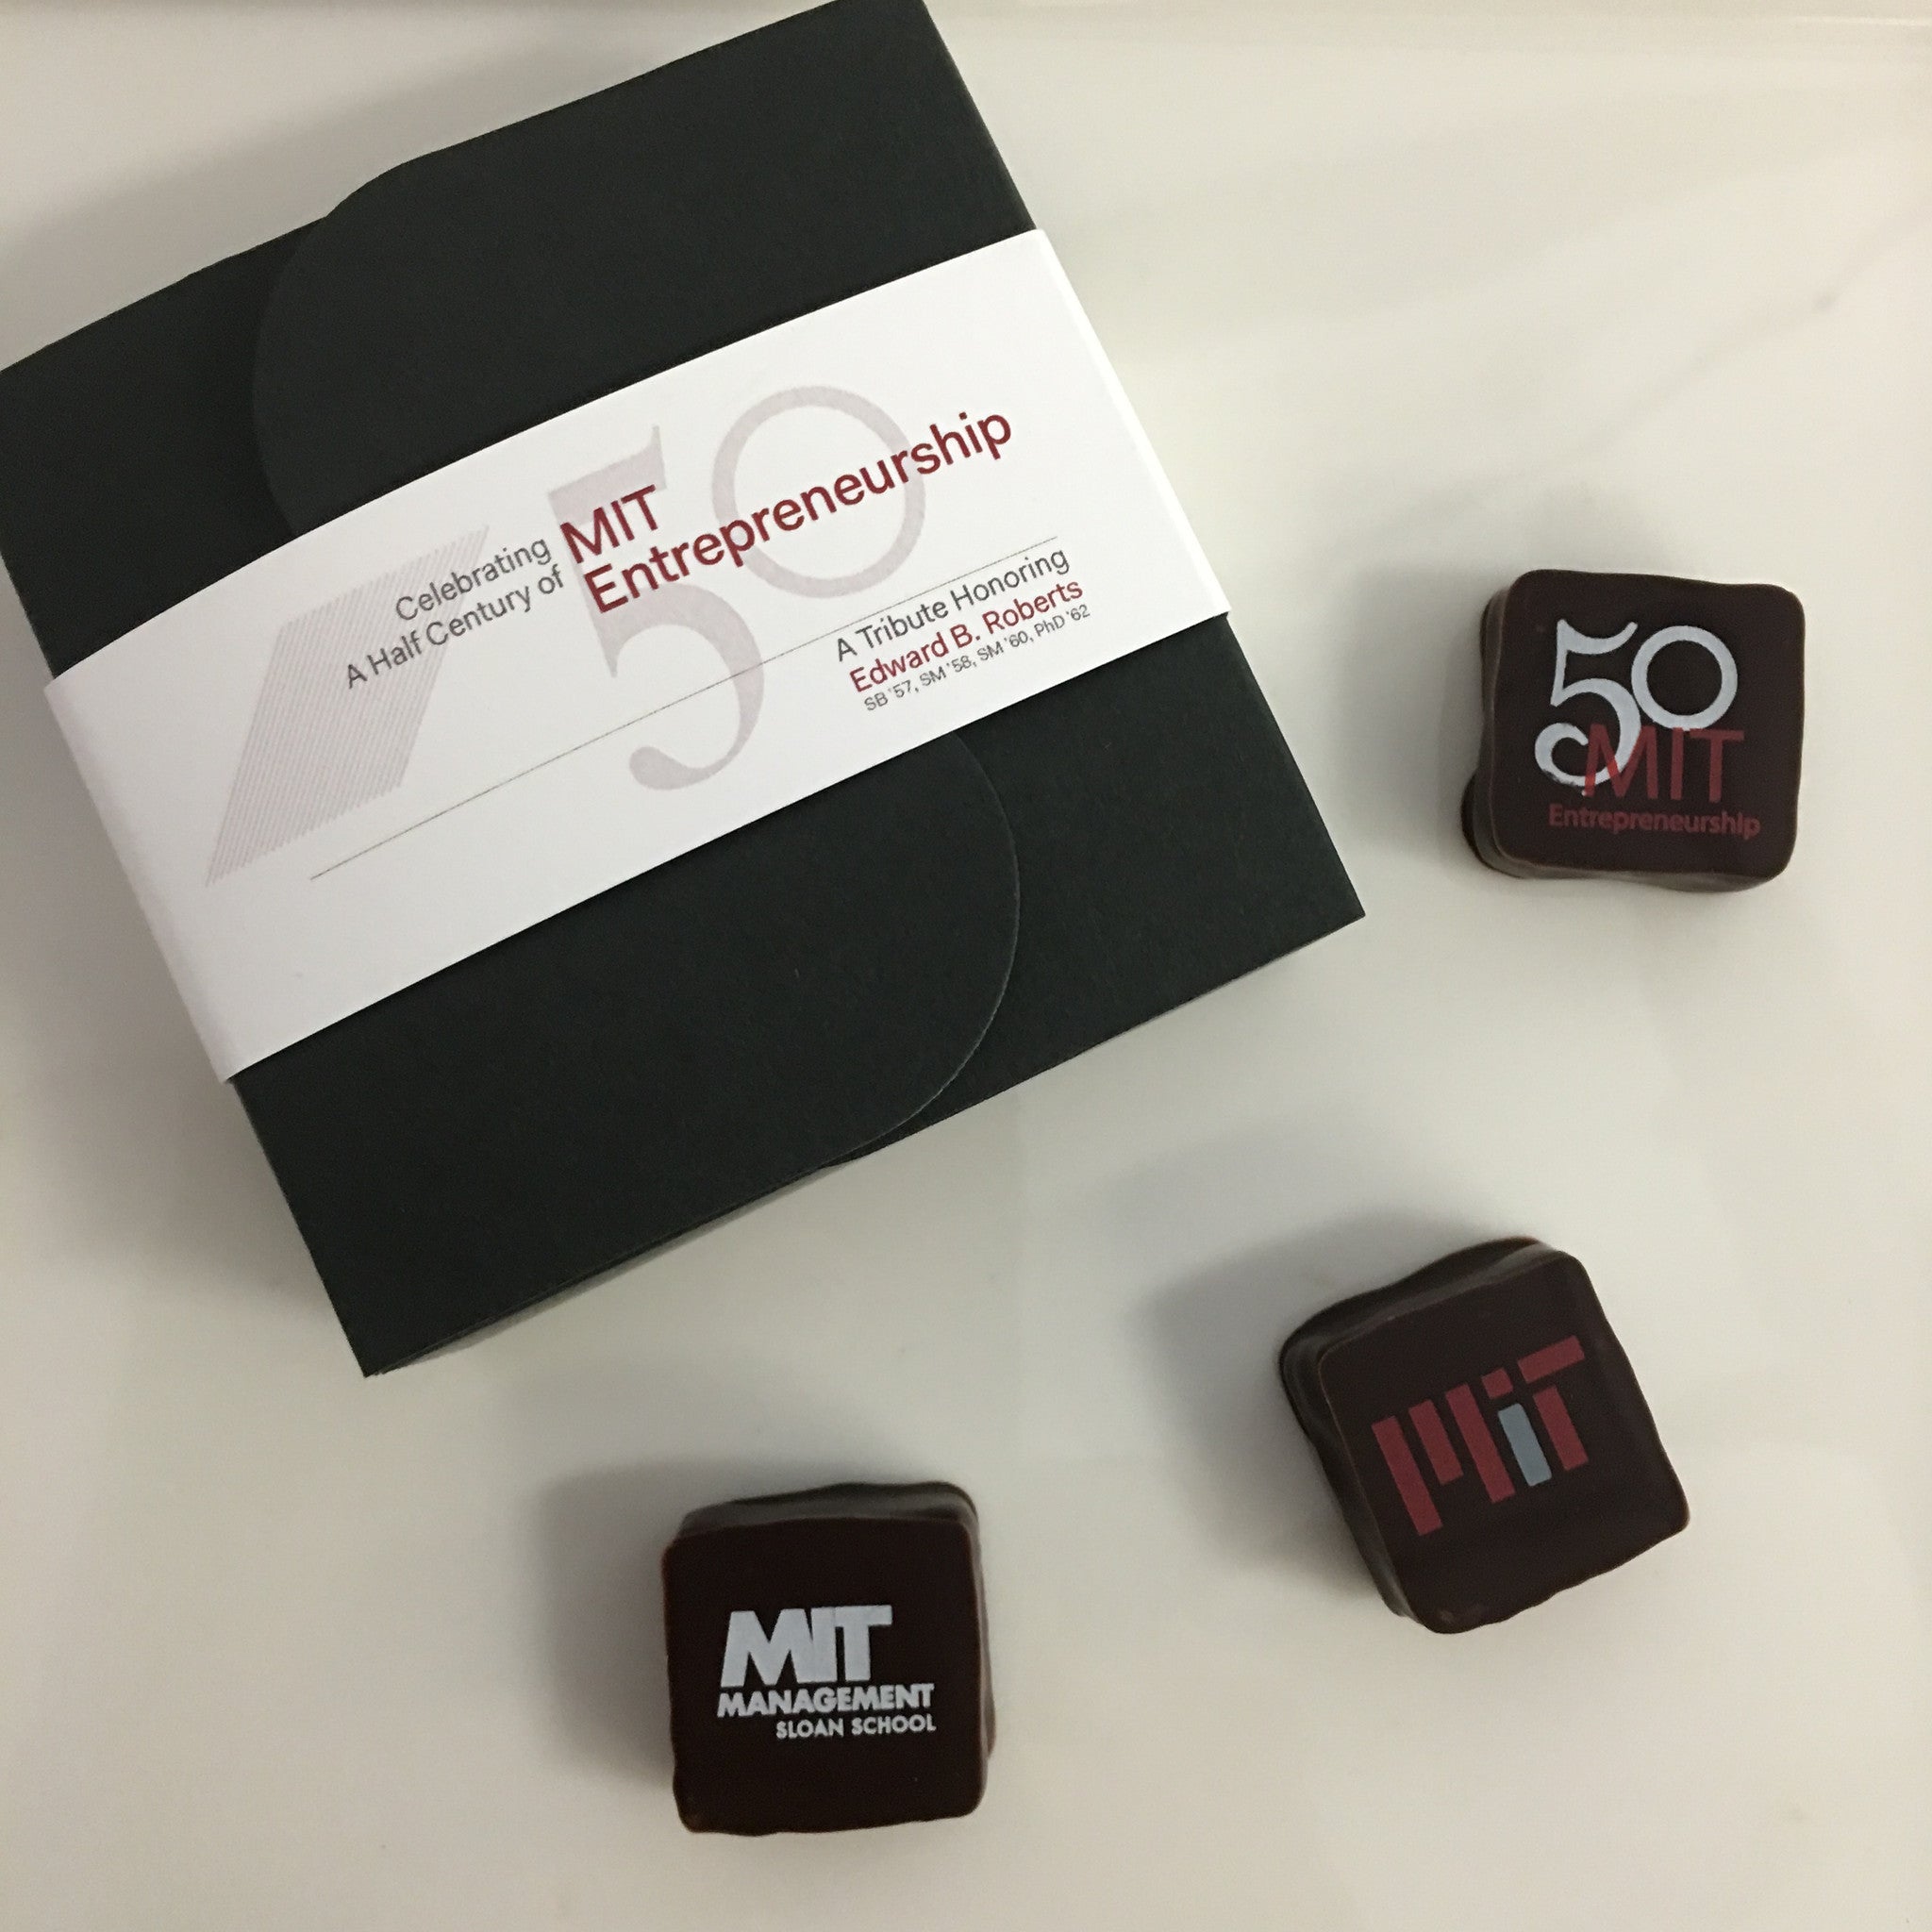 Give Custom Chocolate Gifts for the Holidays